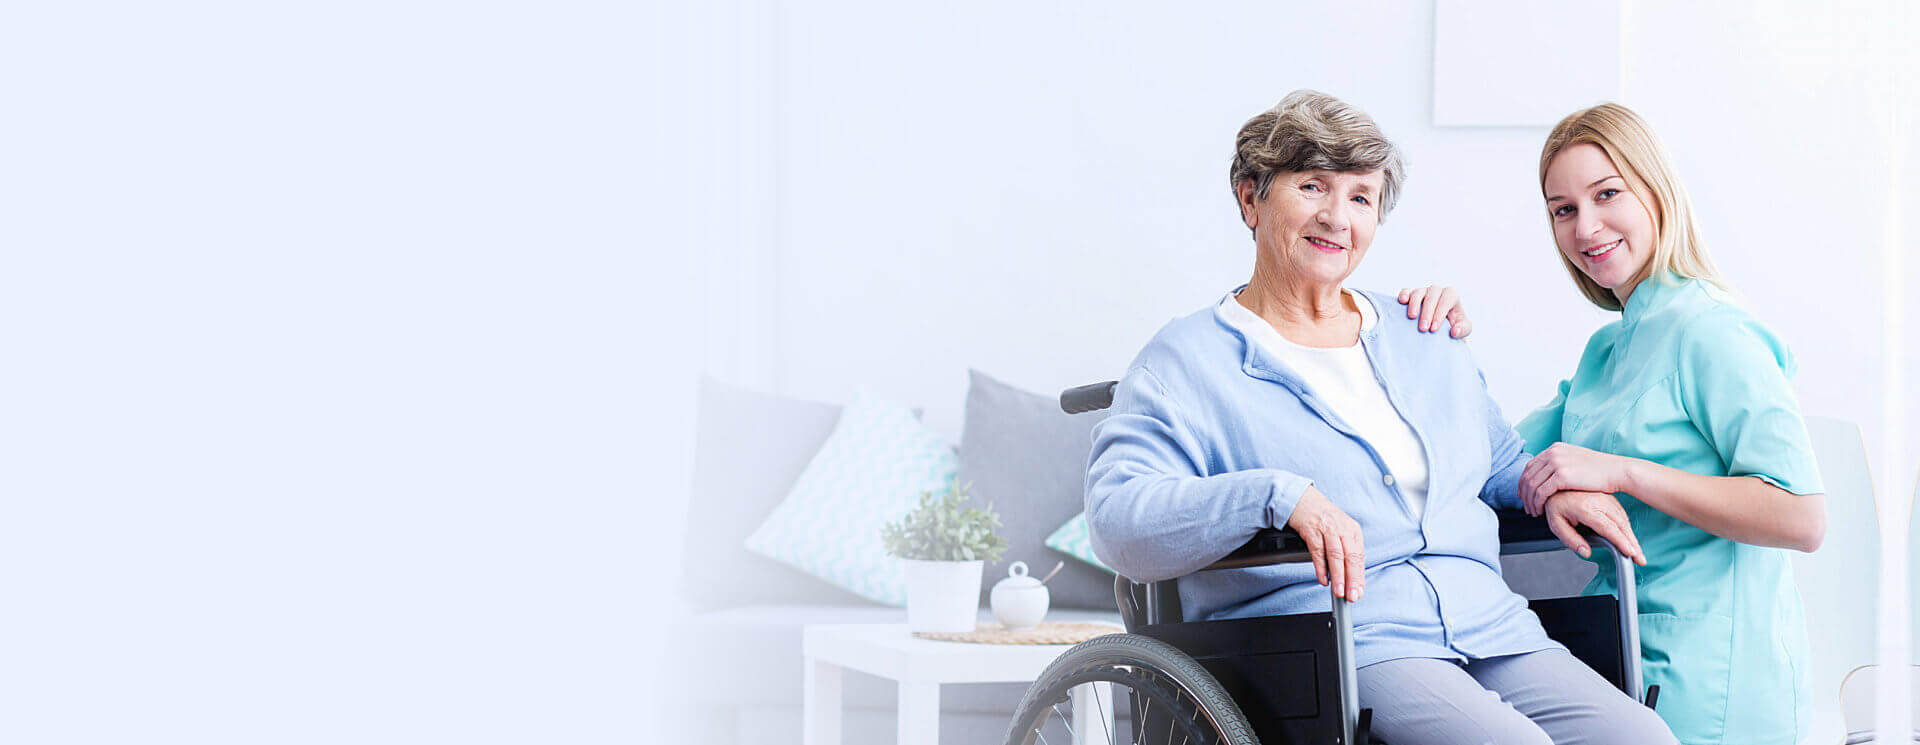 nurse smiling in the camera and elderly woman sitting in the wheelchair